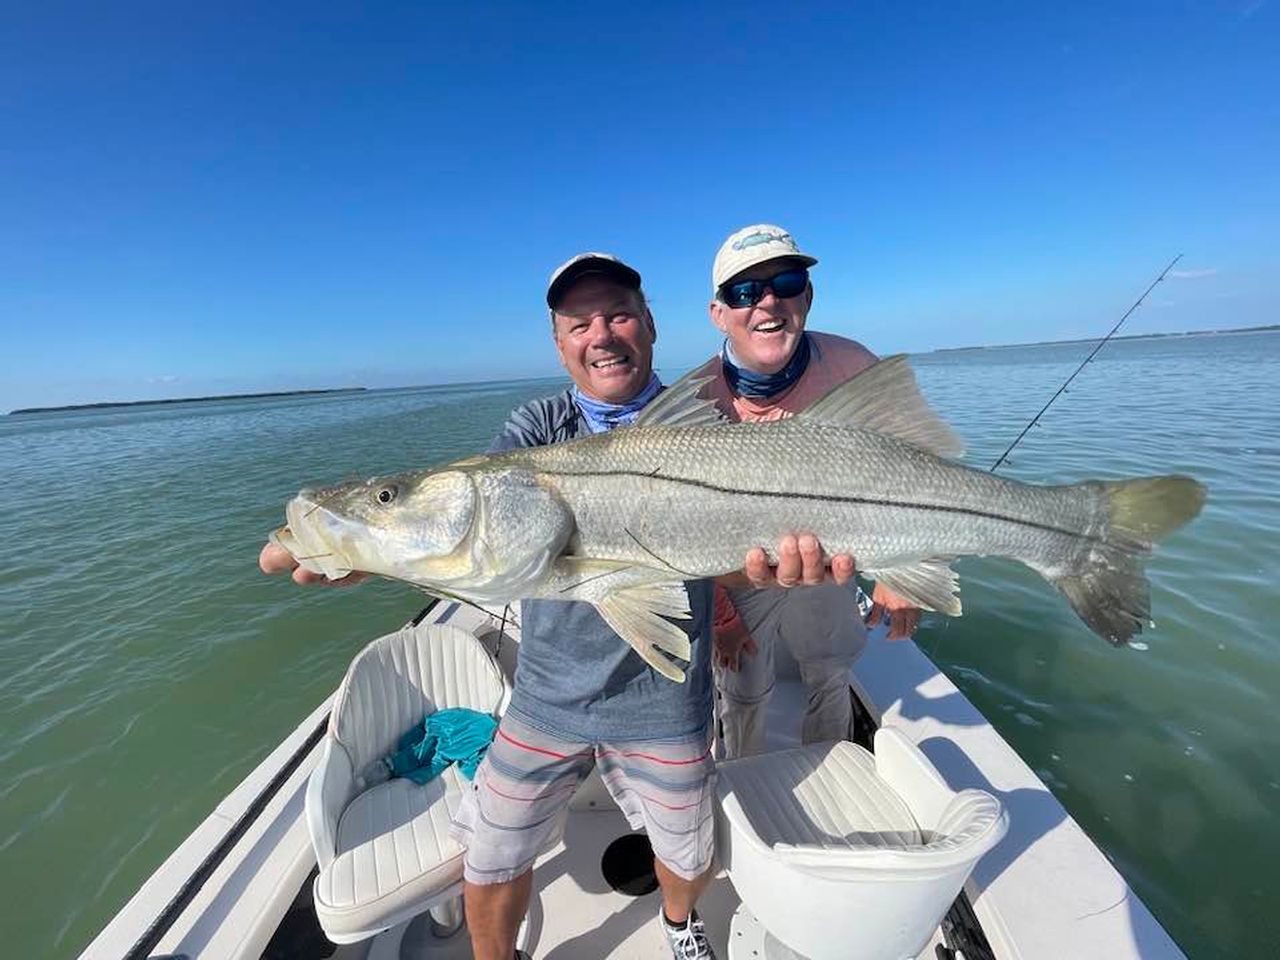 Angler Tom Rodriguez took the largest snook award with a 37.5" fish at the 2022 Take Stock in Children Backcountry Tournament